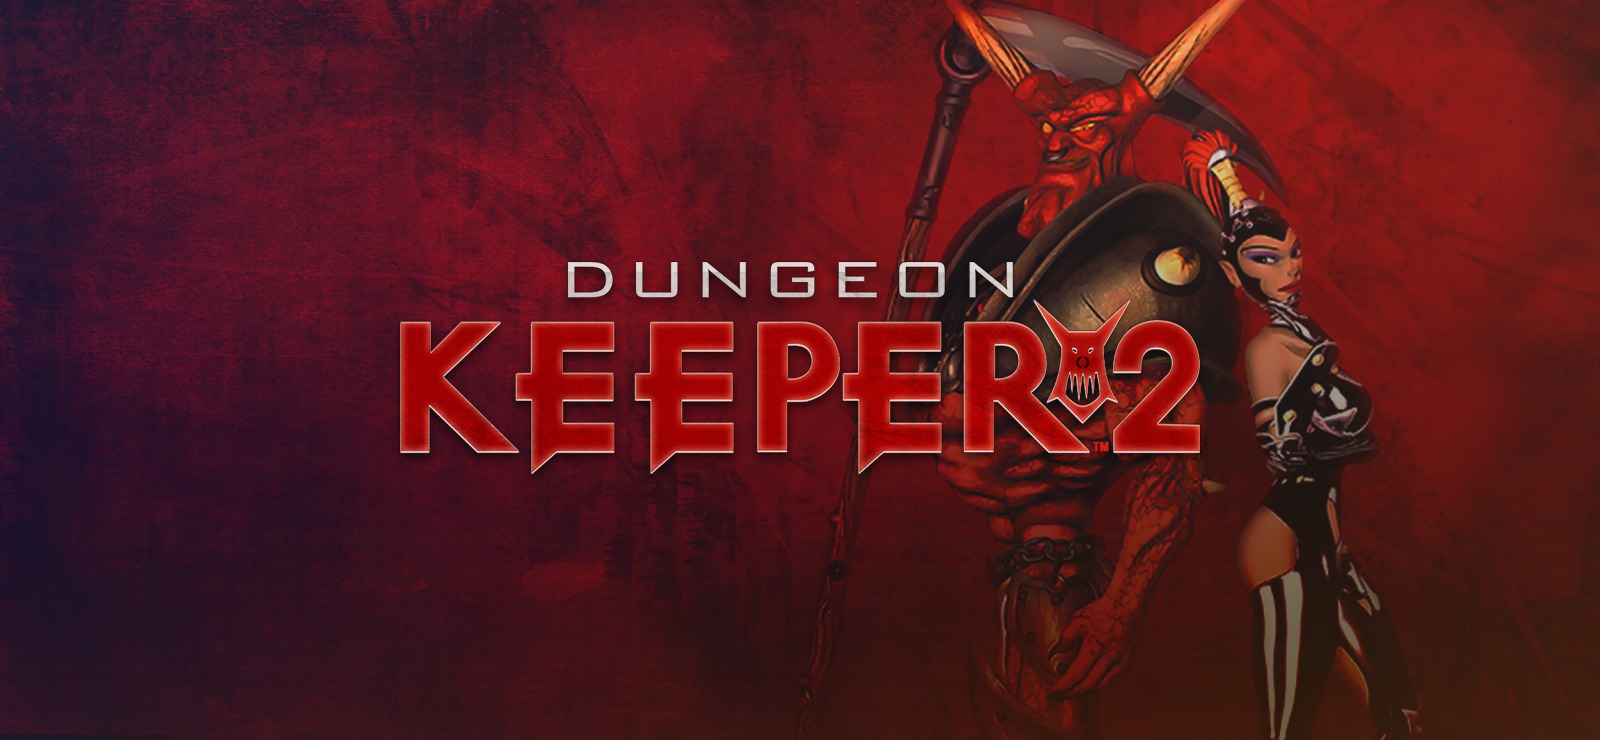 dungeon keeper 2 free full game download